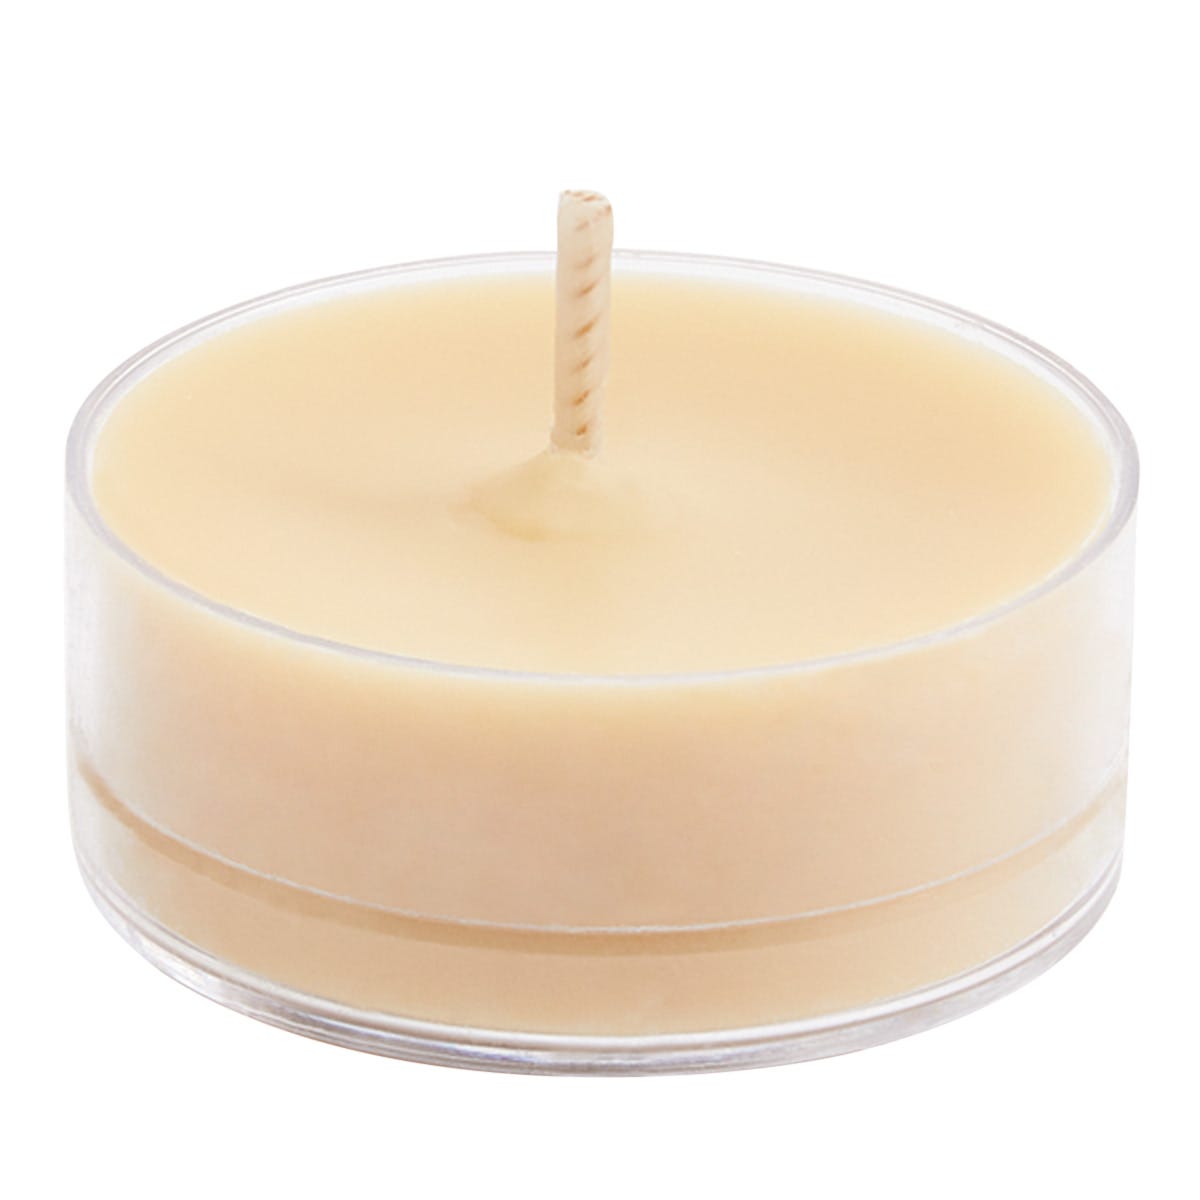 Champagne Pear Universal Tealight® Candles - PartyLite US